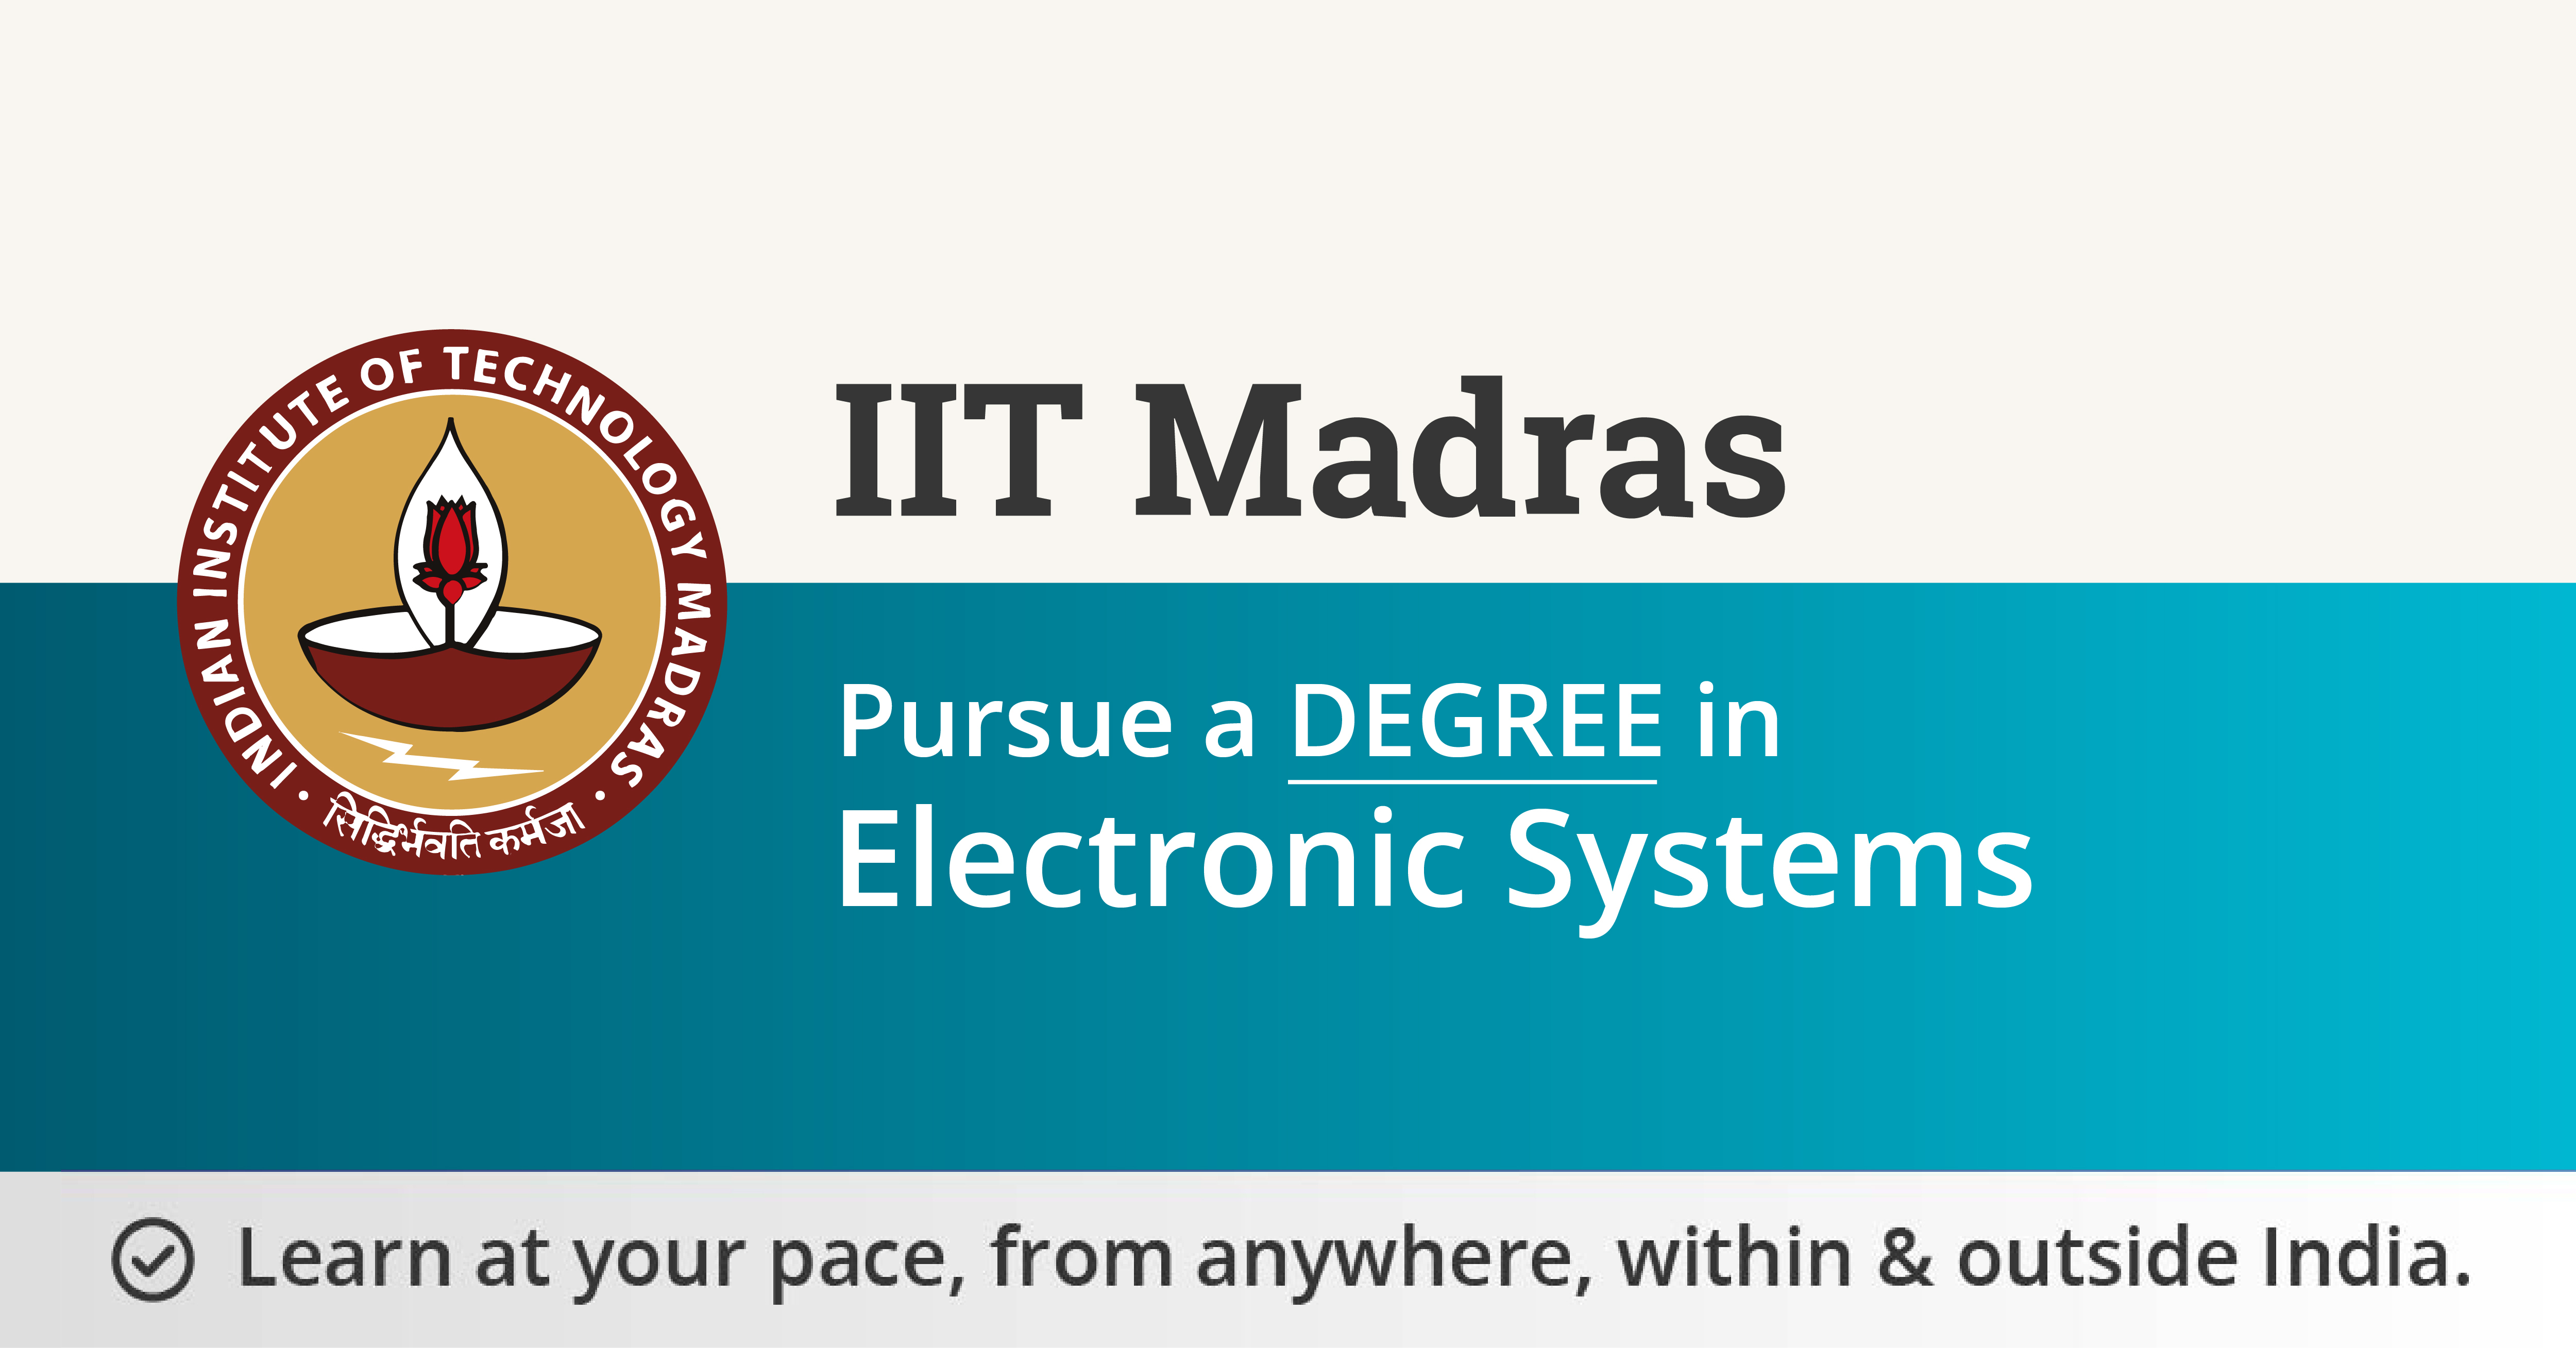 Official Community of Indian Institute of Technology Madras